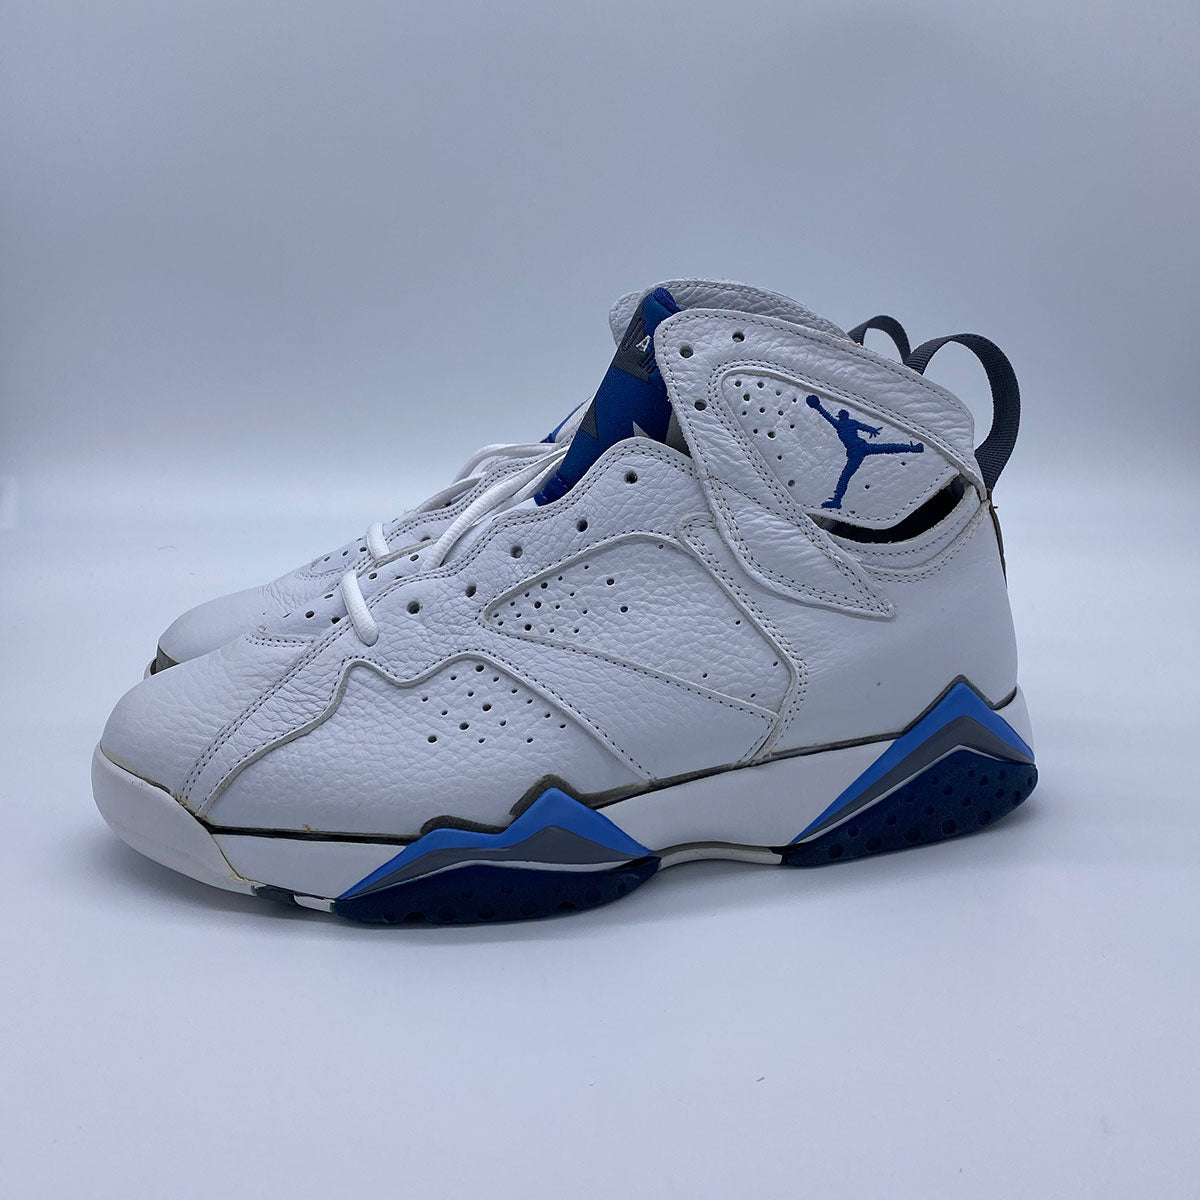 Air Jordan 7 Retro French Blue 2002 Release size 9.5 (New with DEFECT)